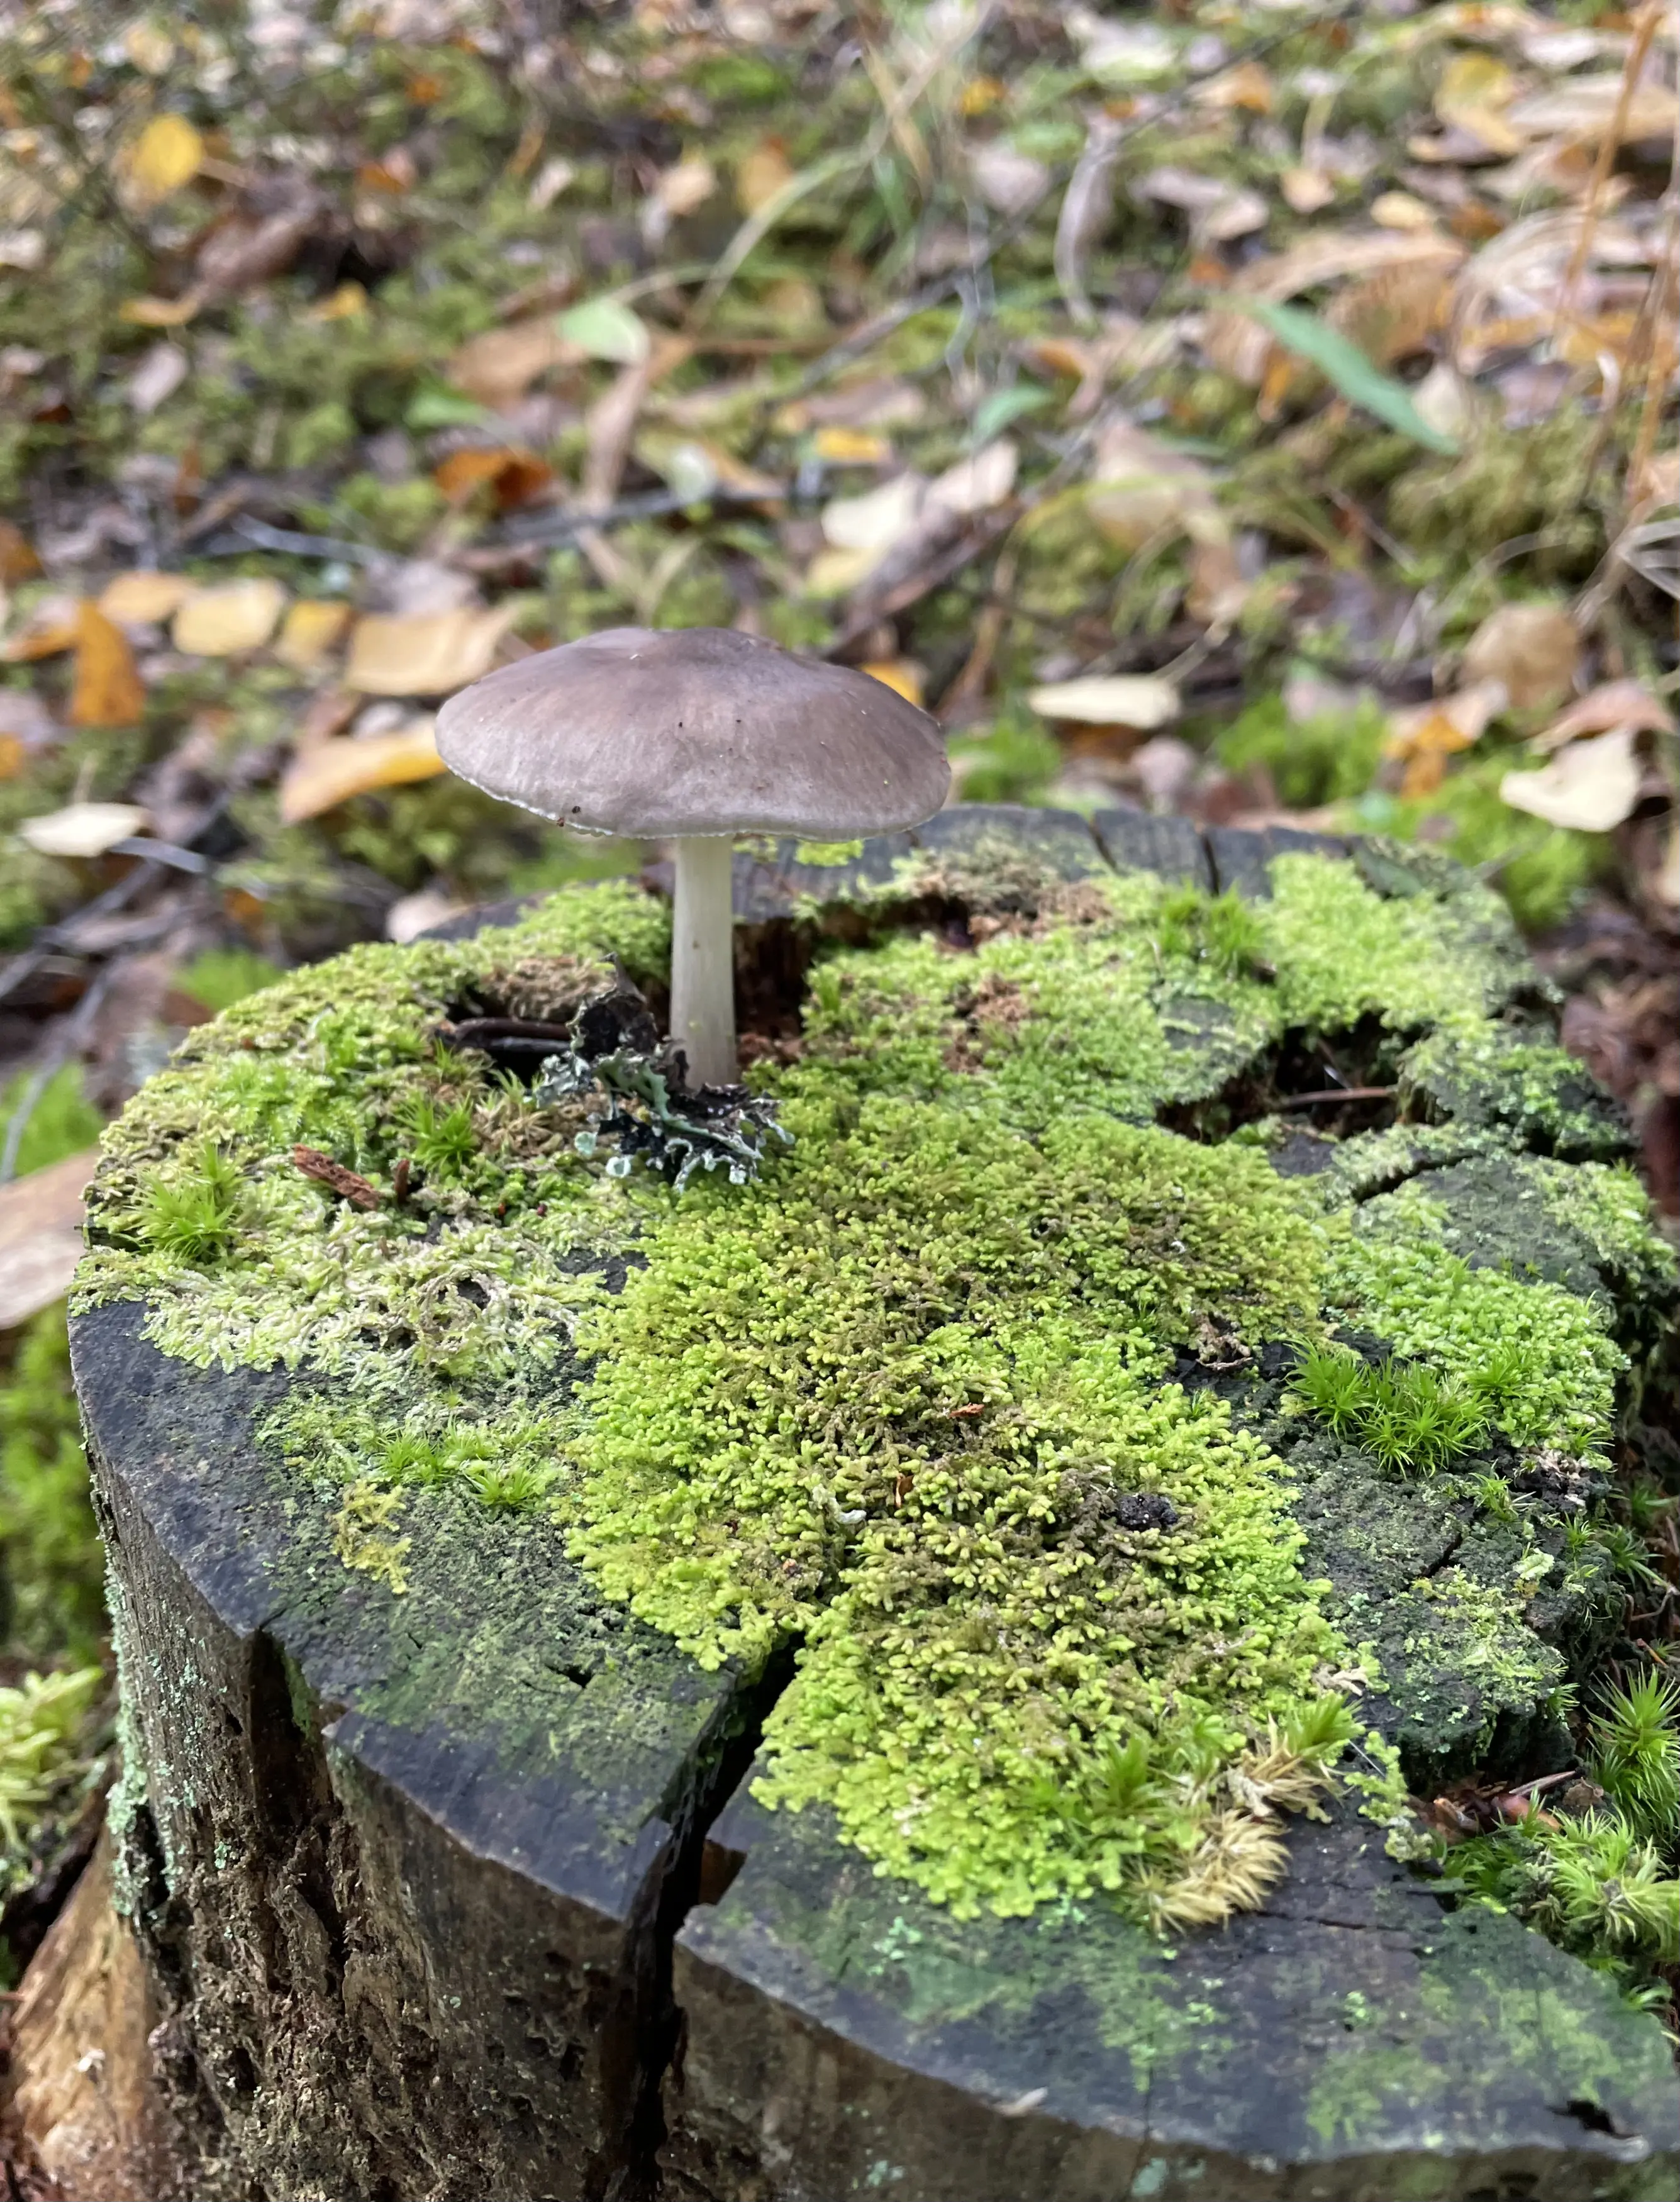 Moss growing on an old stump.